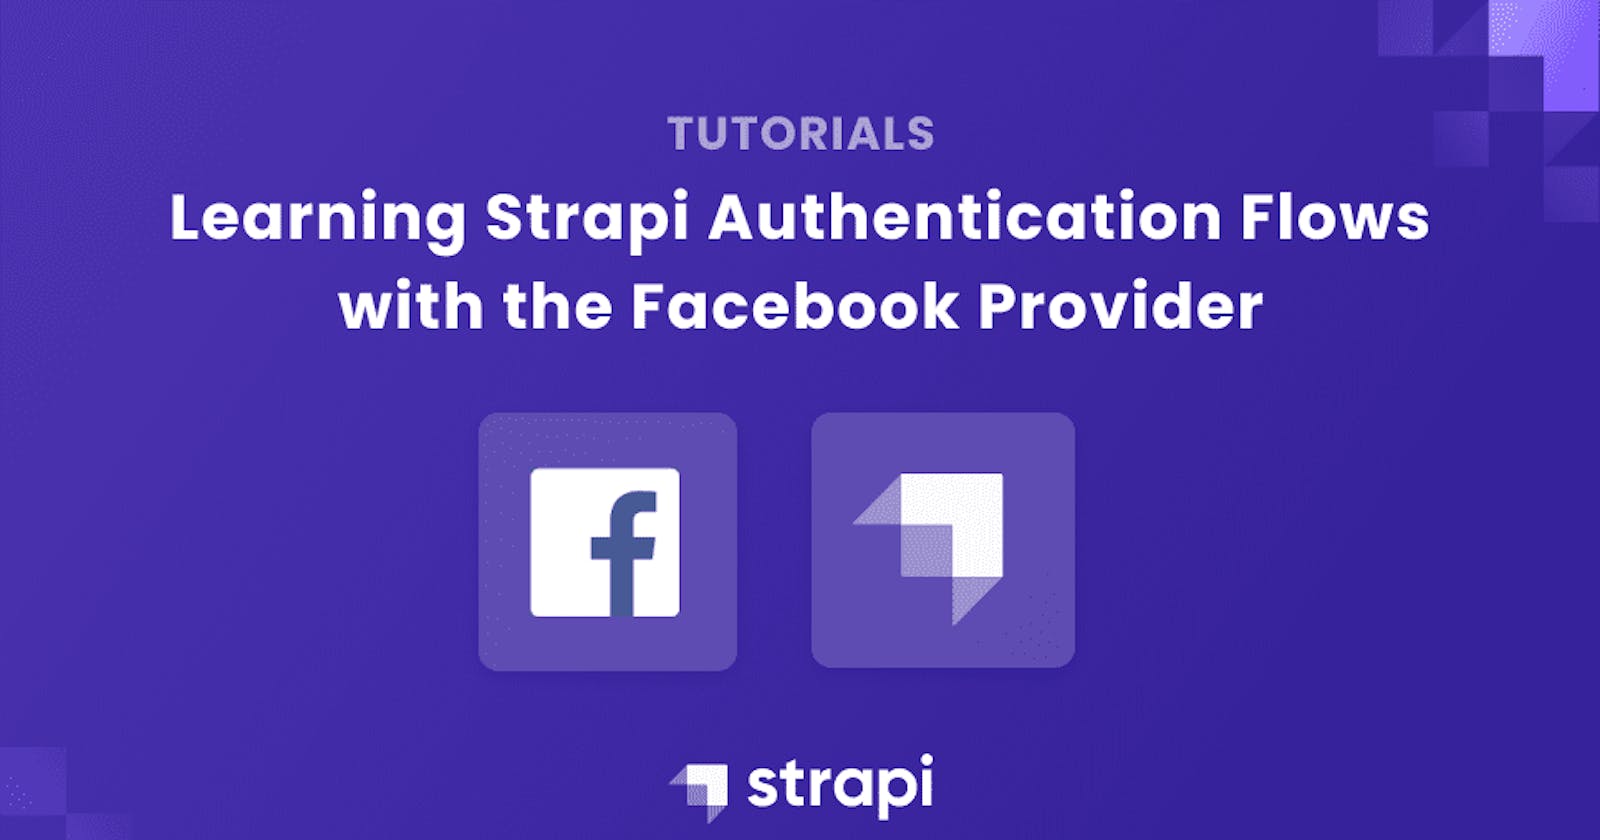 Learning Strapi Authentication Flows with the Facebook Provider